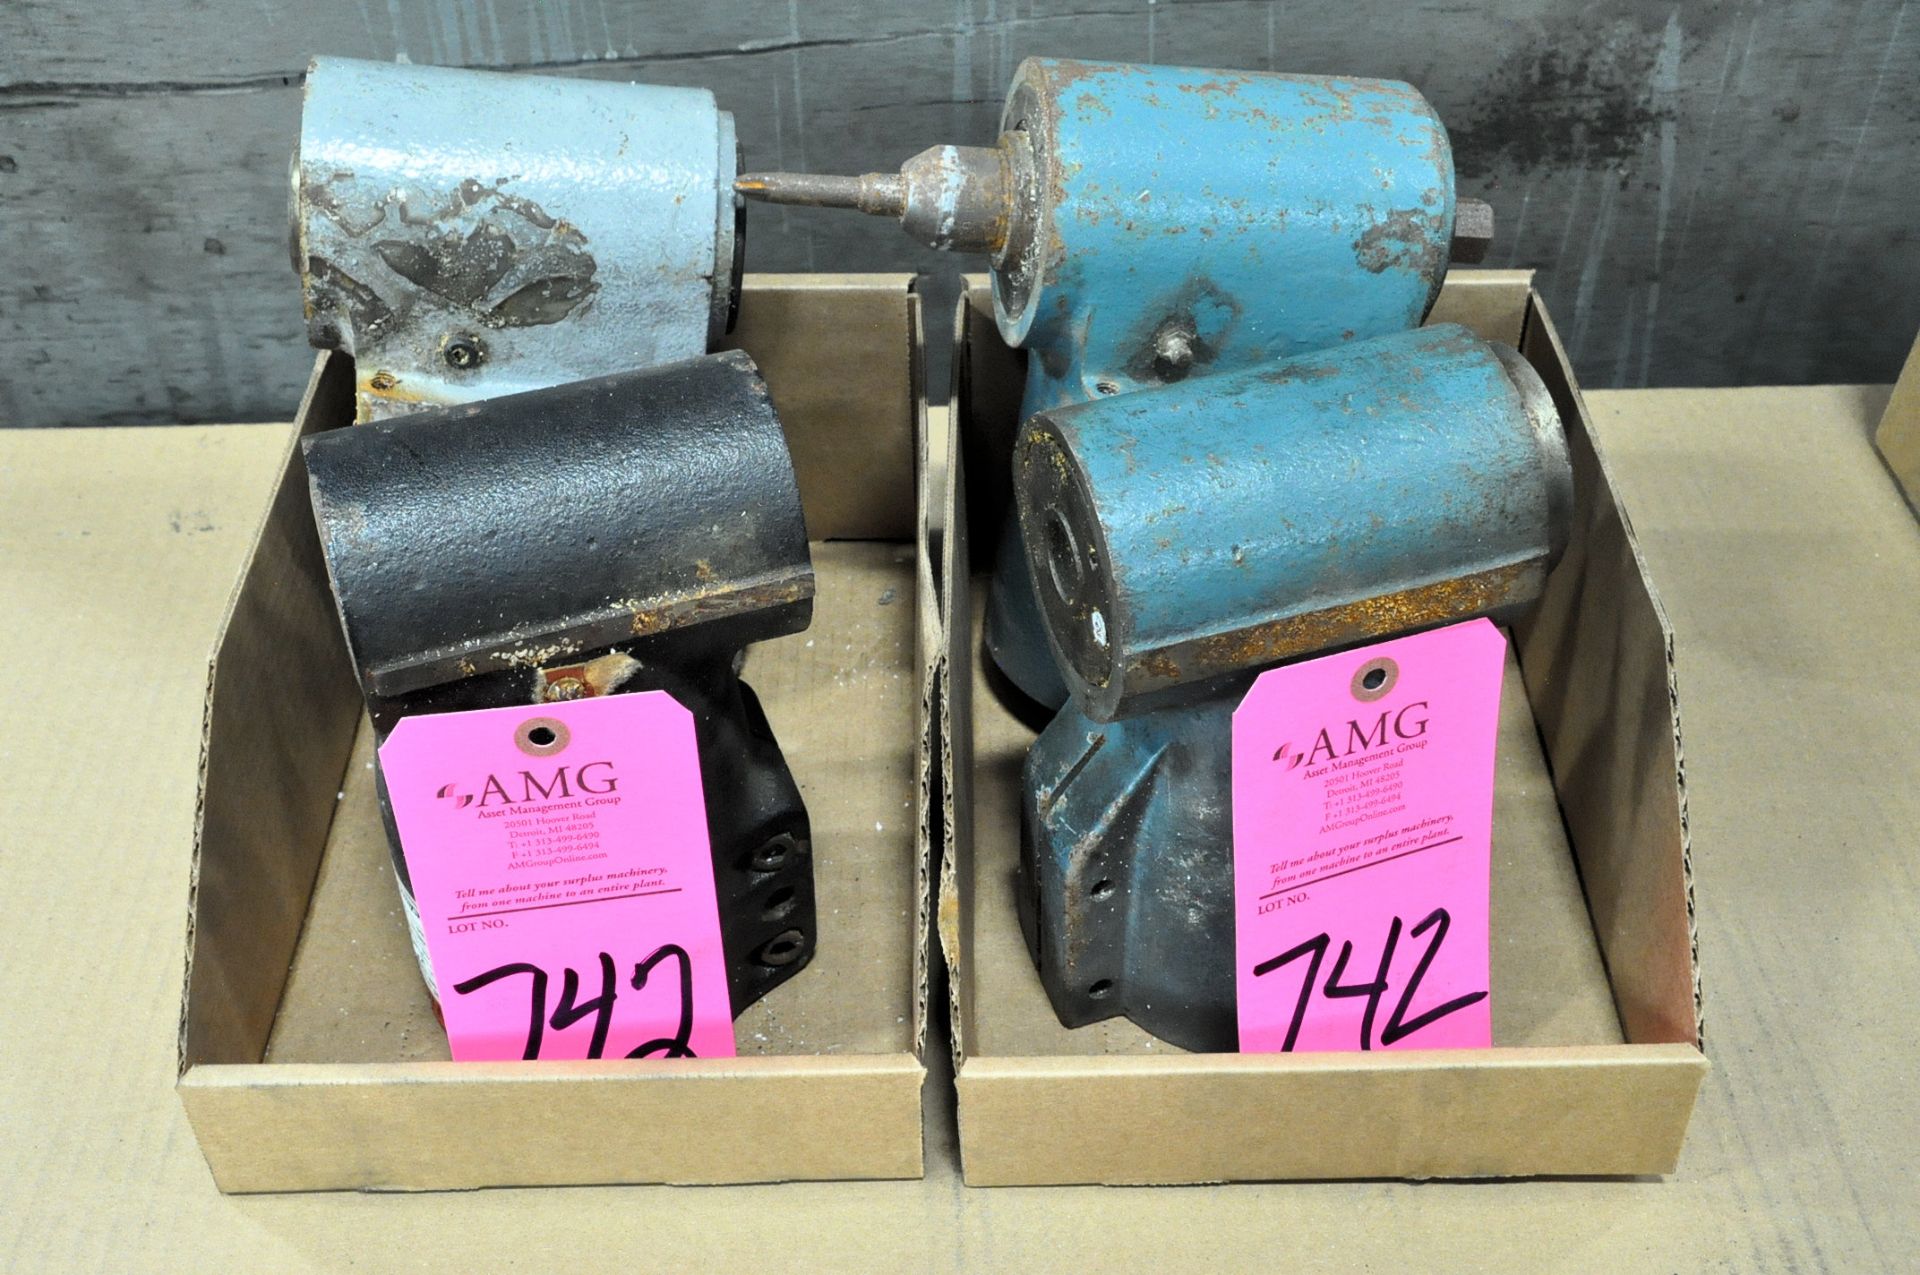 Lot-(4) 90-Degree Heads in (2) Boxes, (Grinding Room), (Pink Tag)